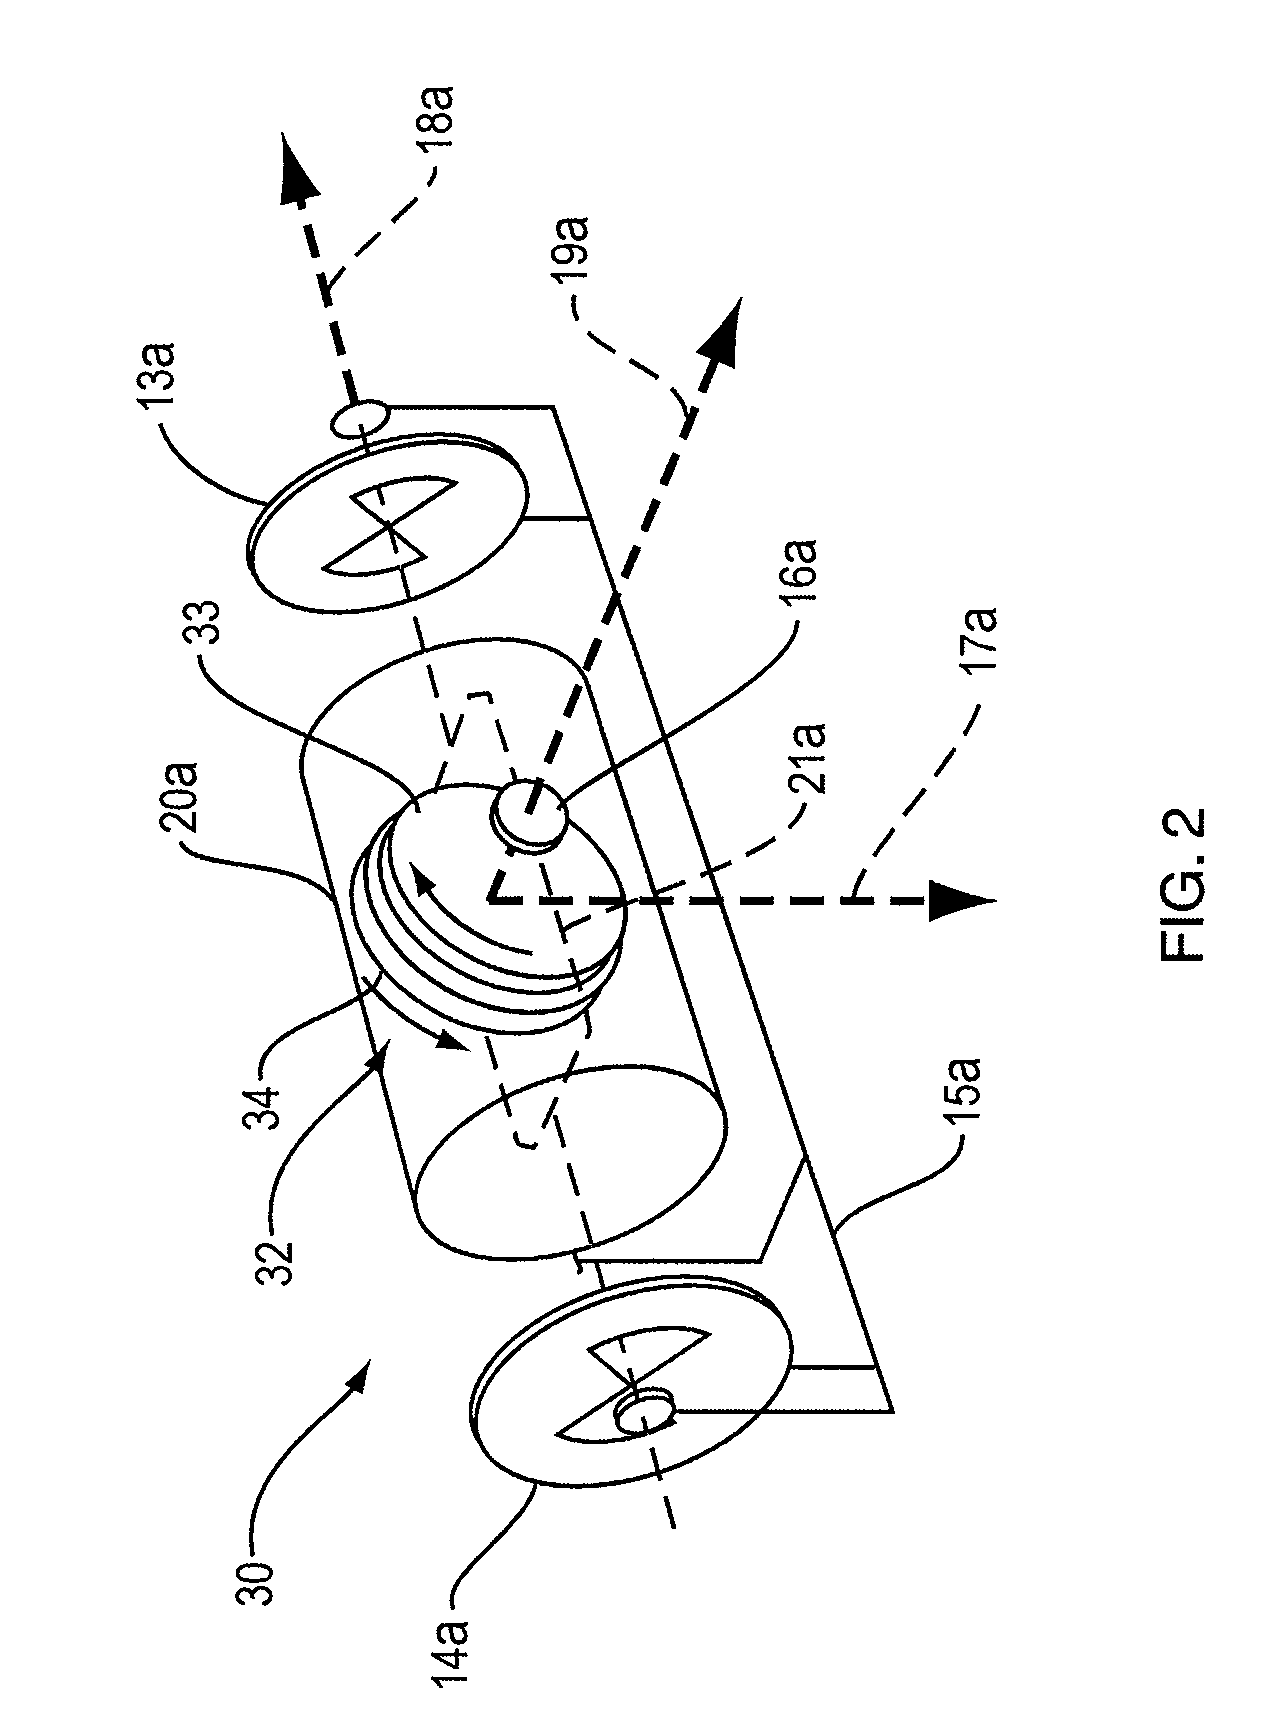 Gyroscope and pendulous gyroscopic accelerometer with adjustable scale factor, and gravity gradiometer using such